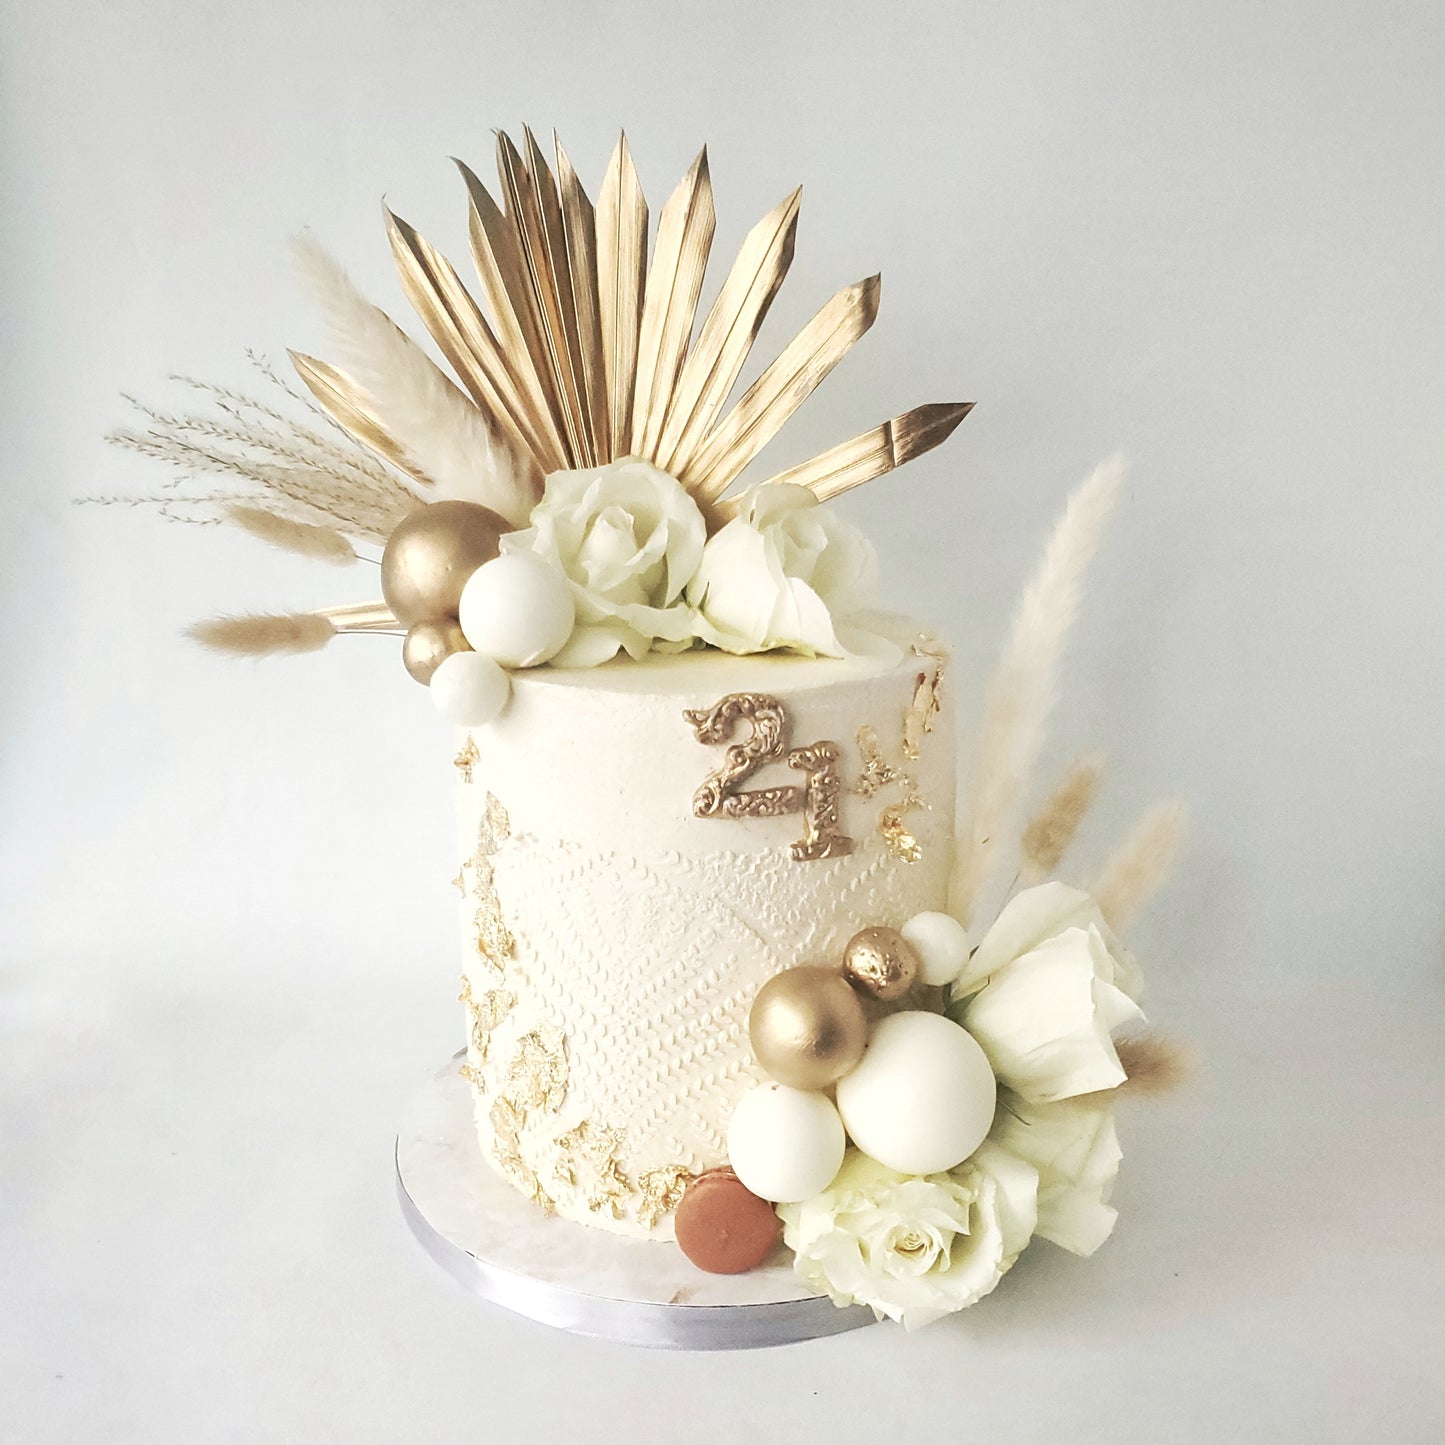 Intro to Cake Decorating (SAT APR 6th)